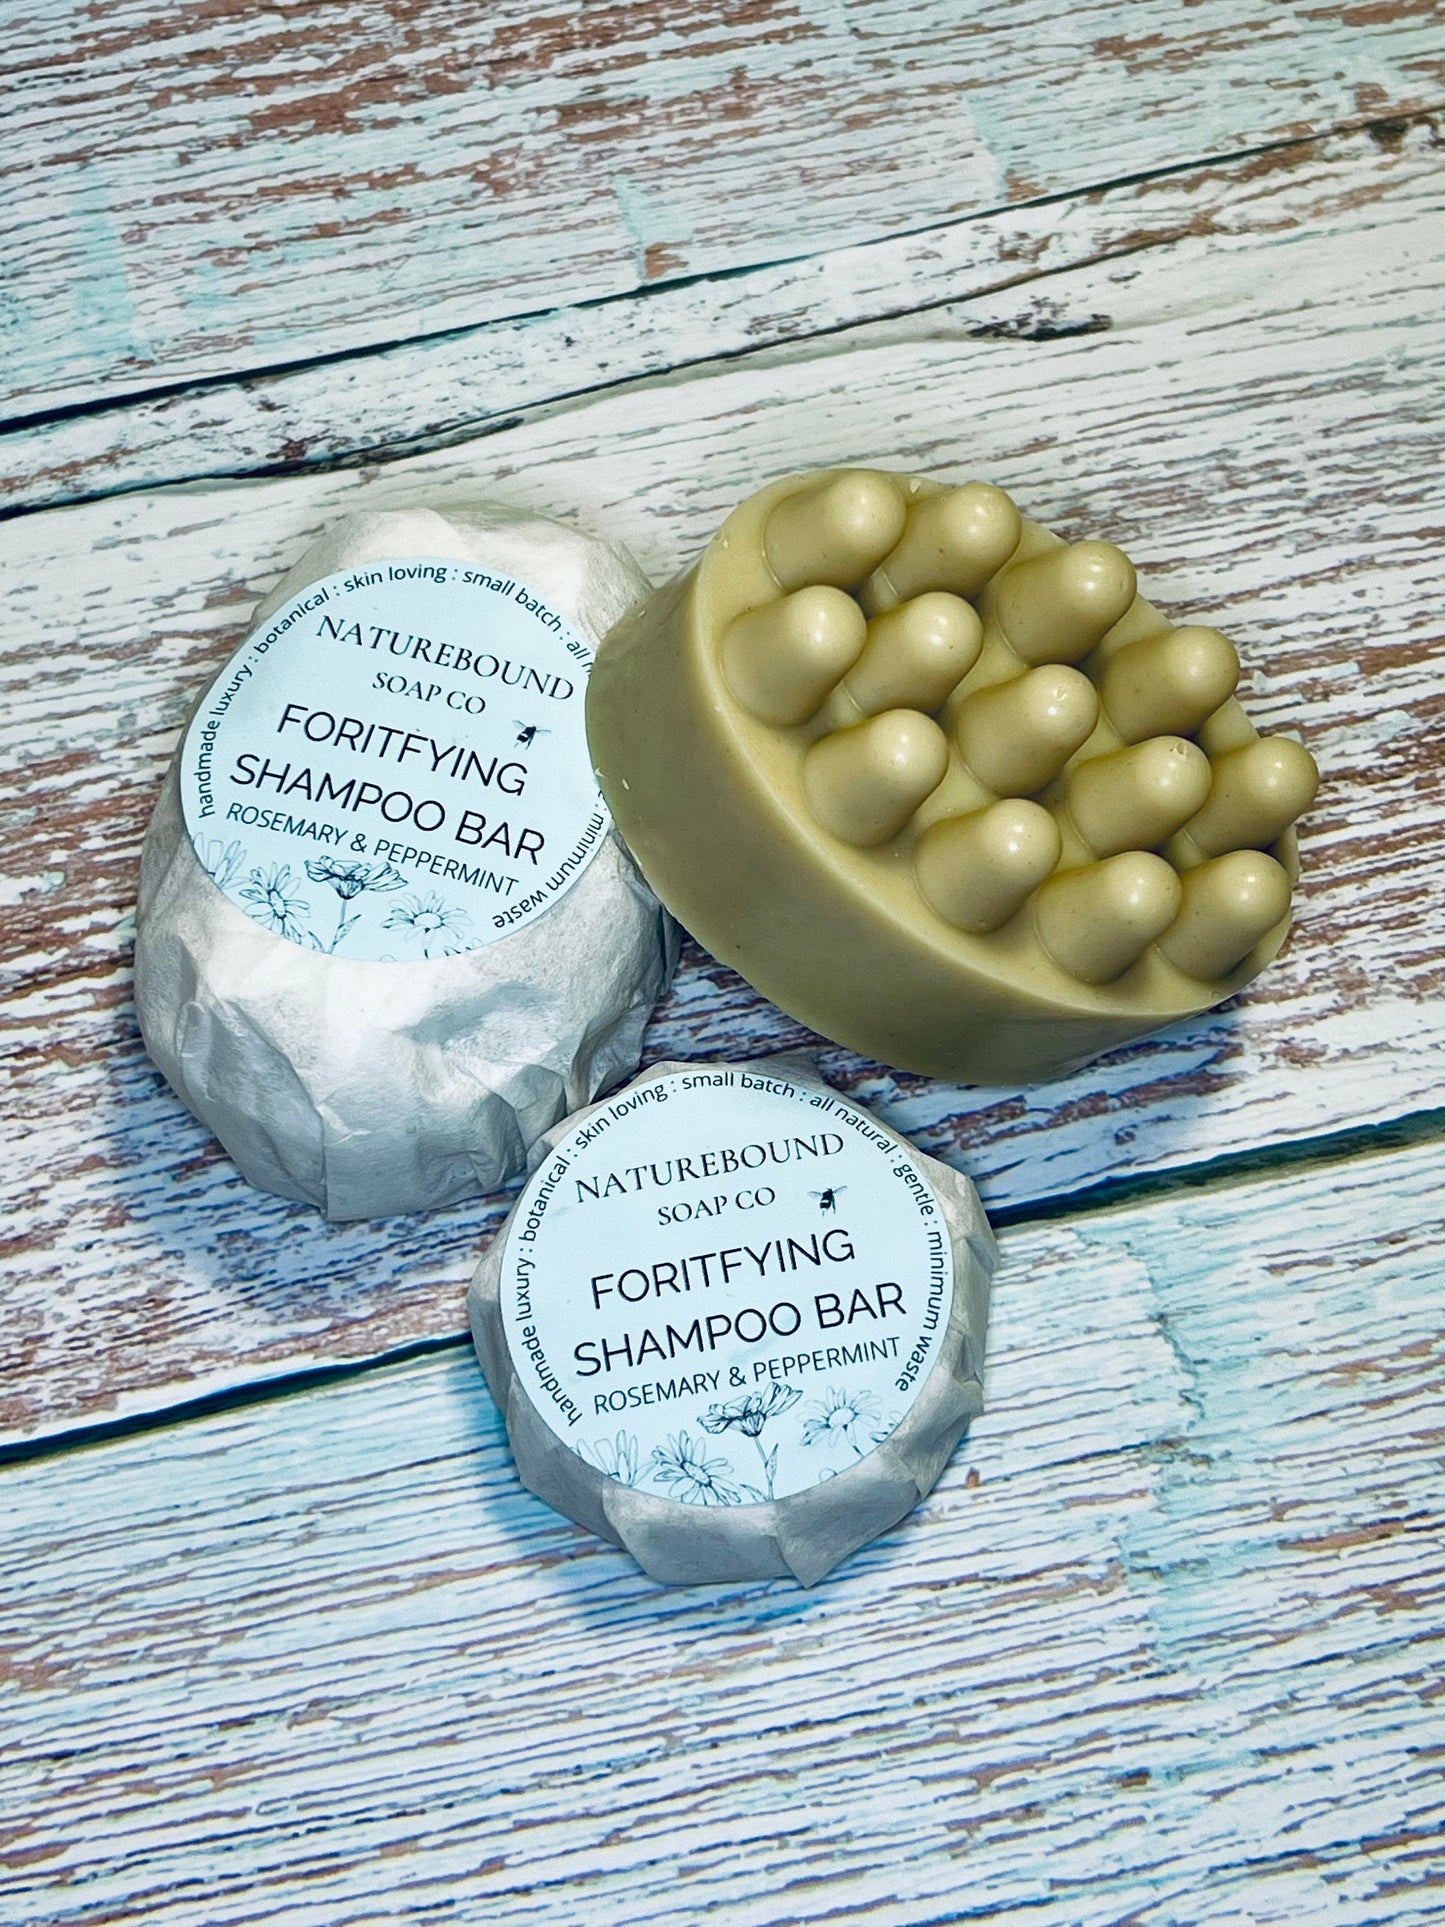 FORTIFYING SHAMPOO BAR- Rosemary & Peppermint